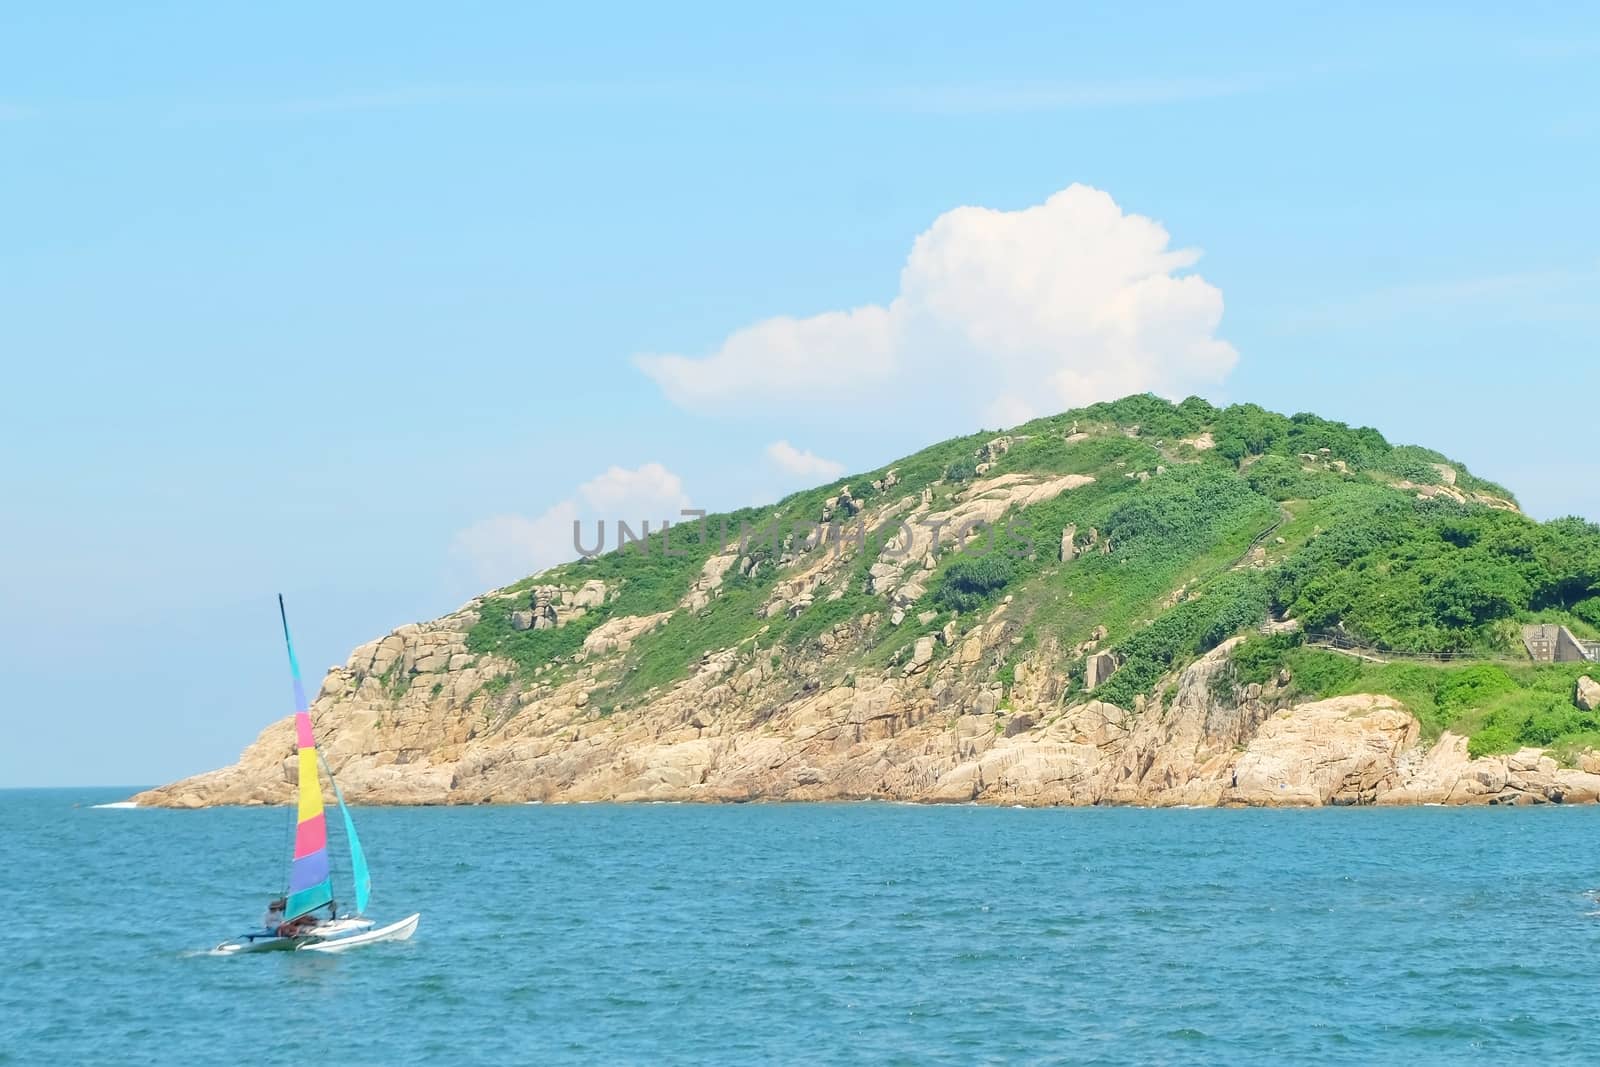 Colorful sailboat passes the small rock island in the sea